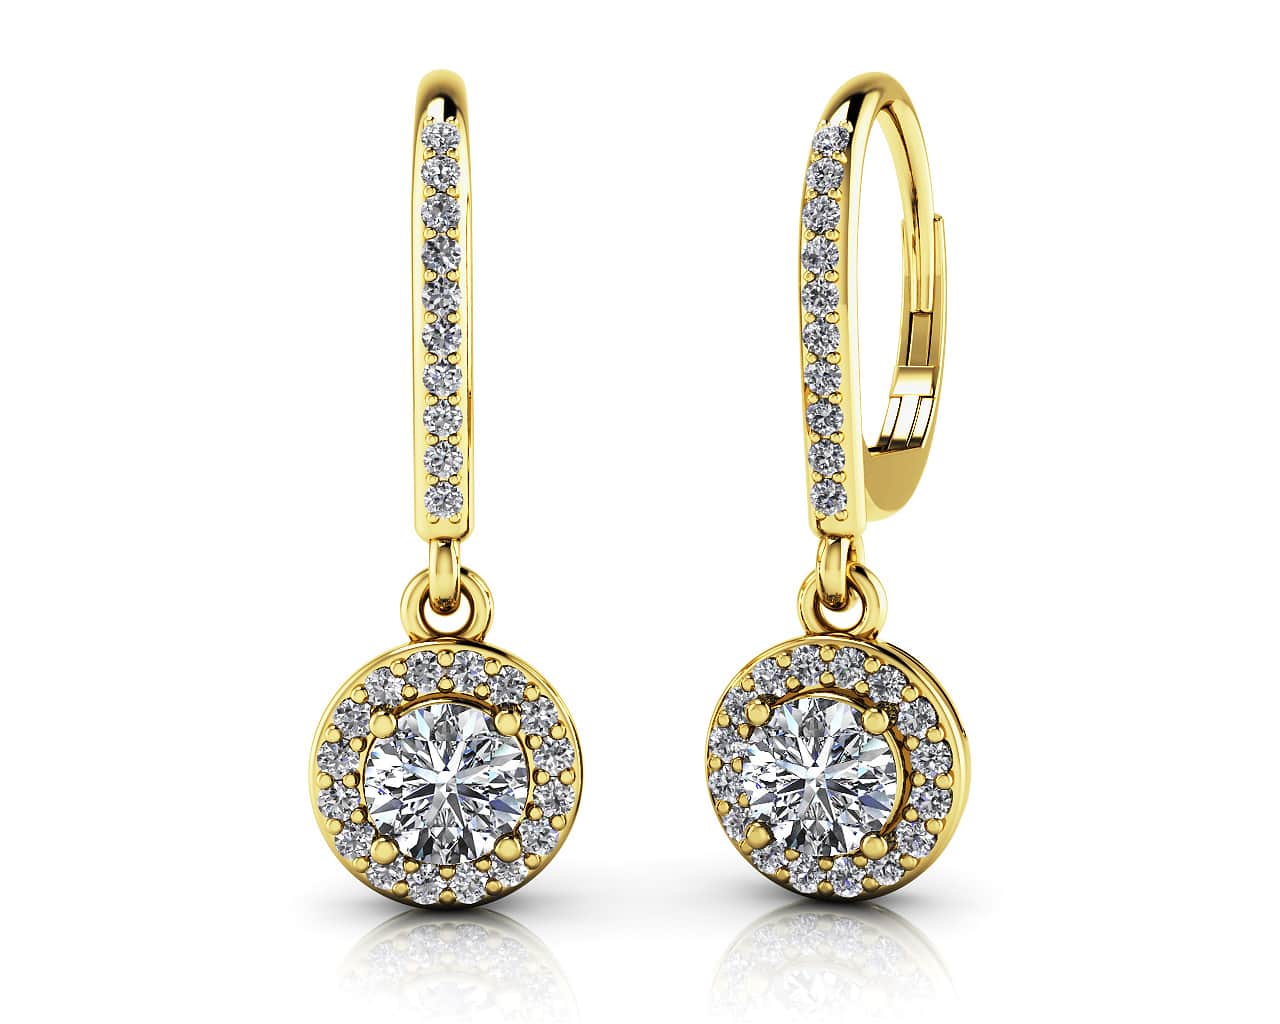 Surrounded With Love Diamond Drop Earrings 3/4 Carat Total Weight